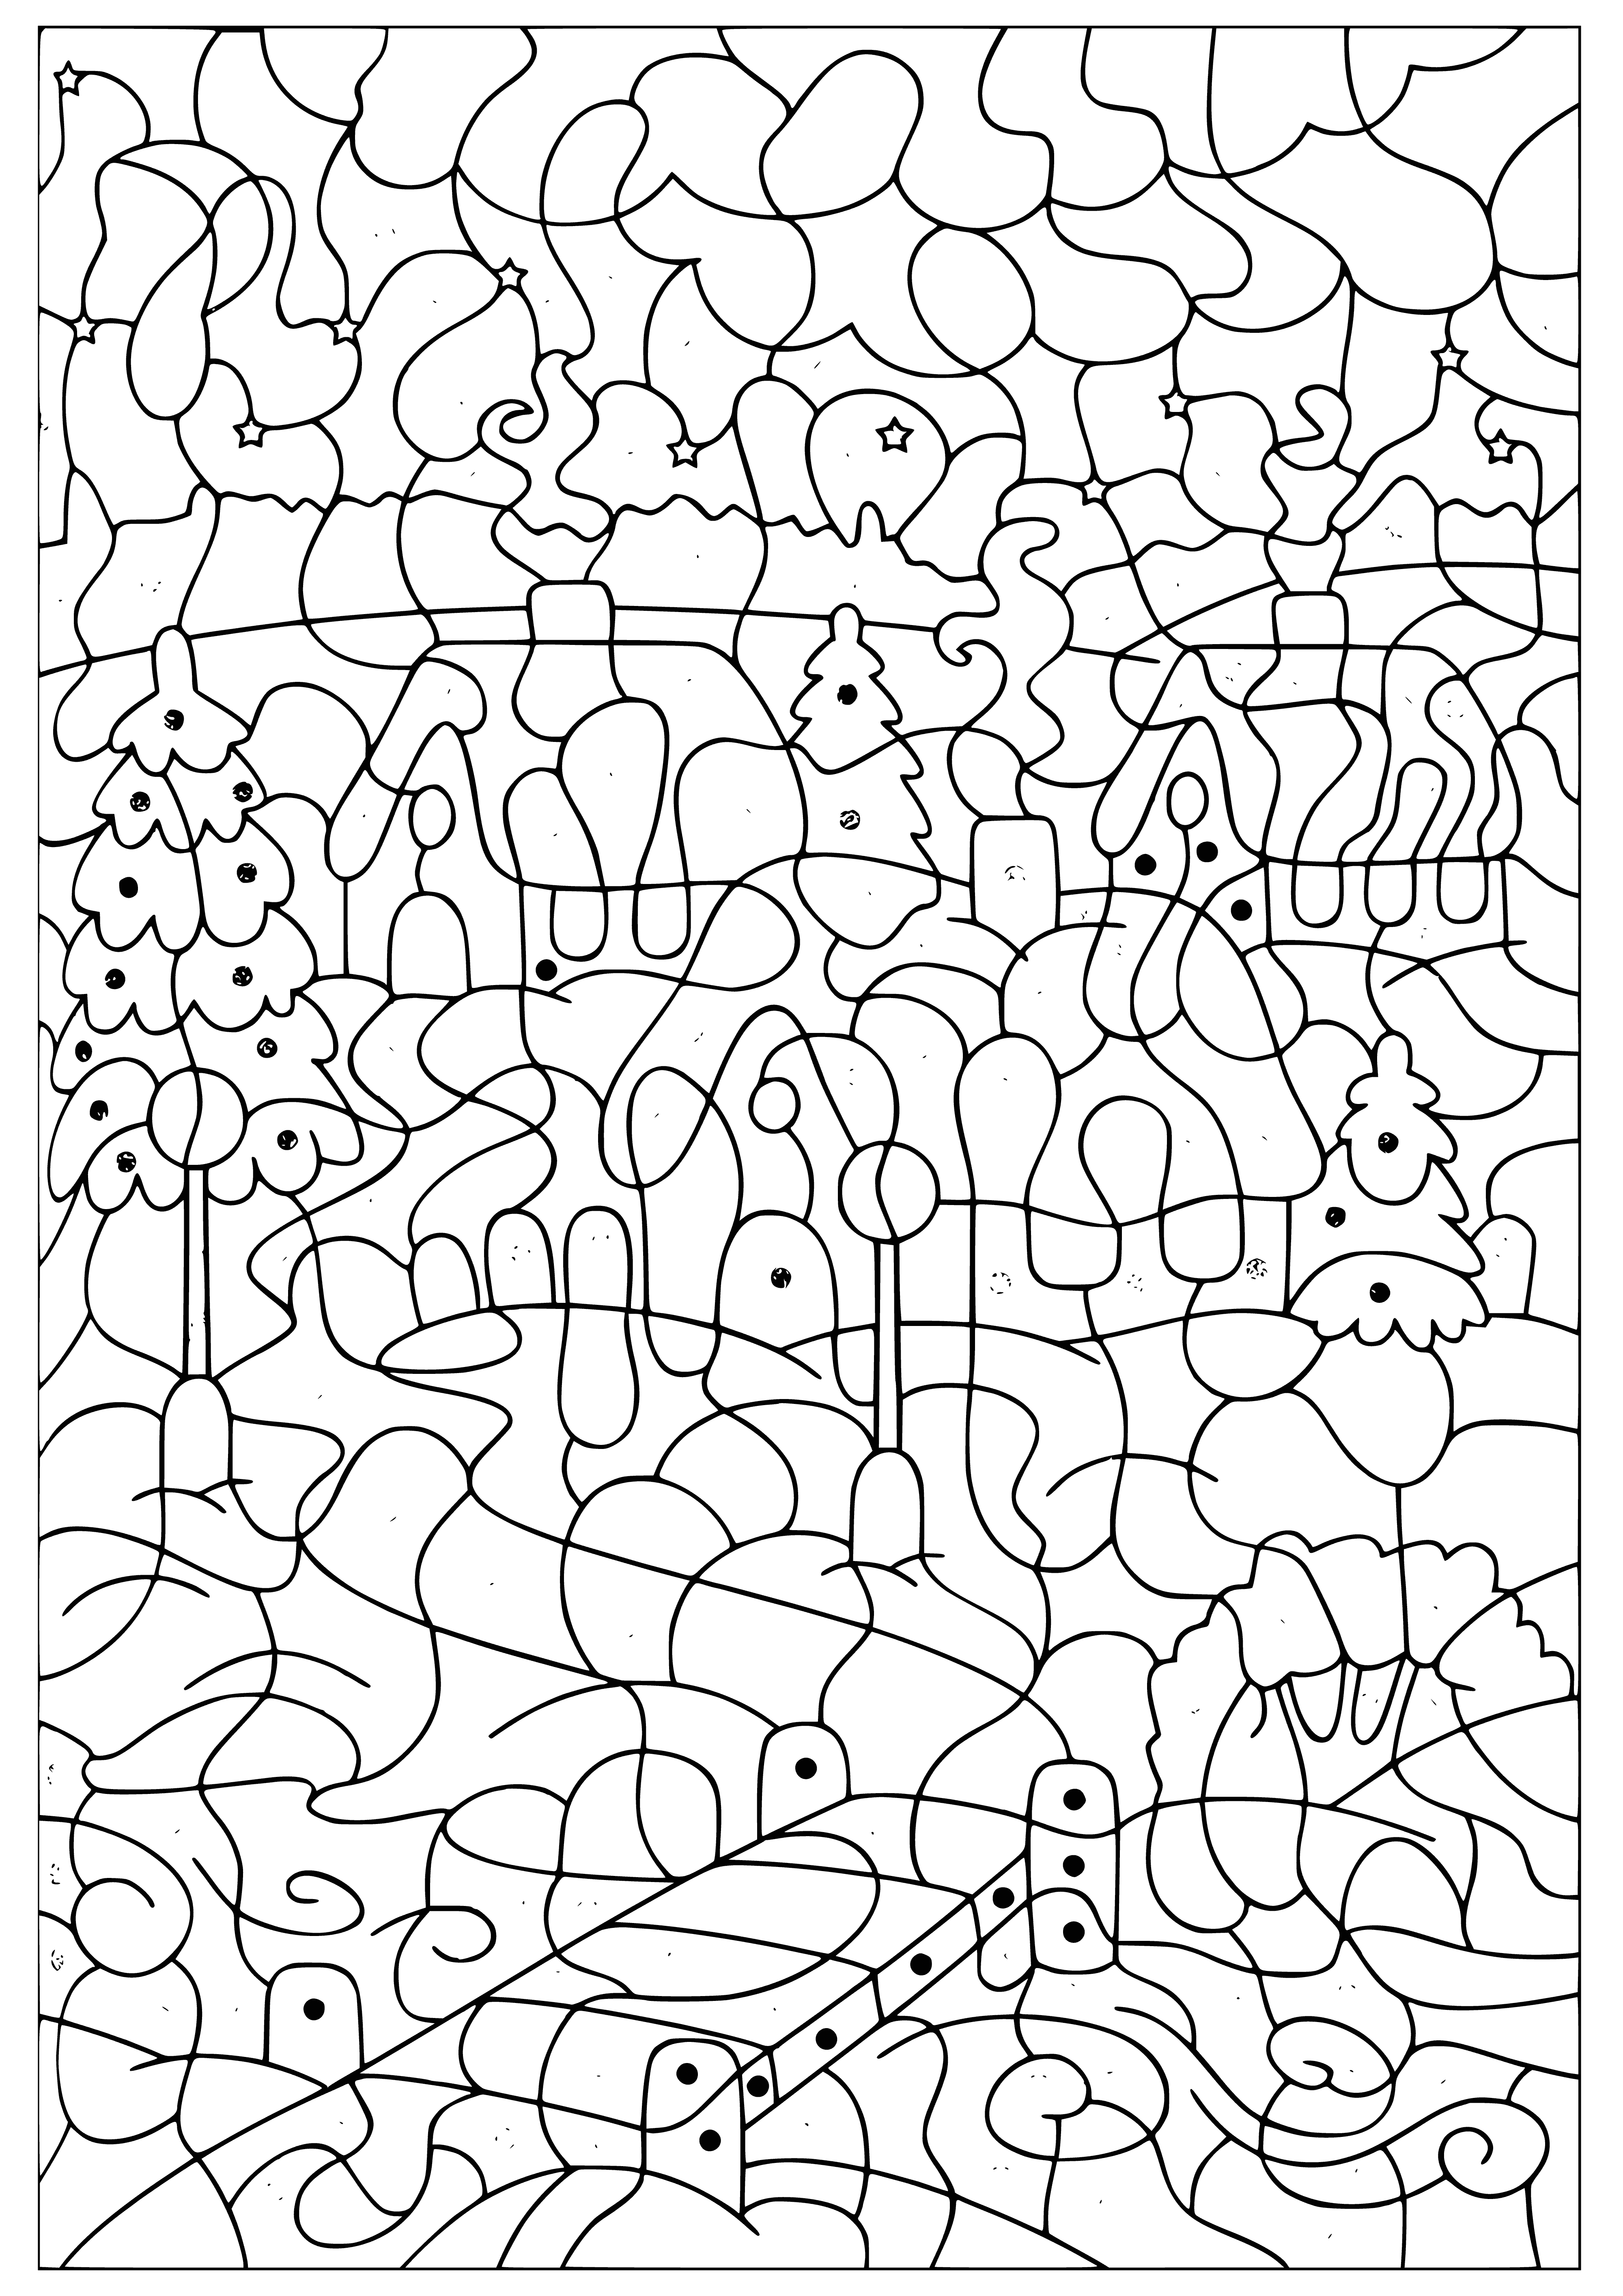 Winter coloring page